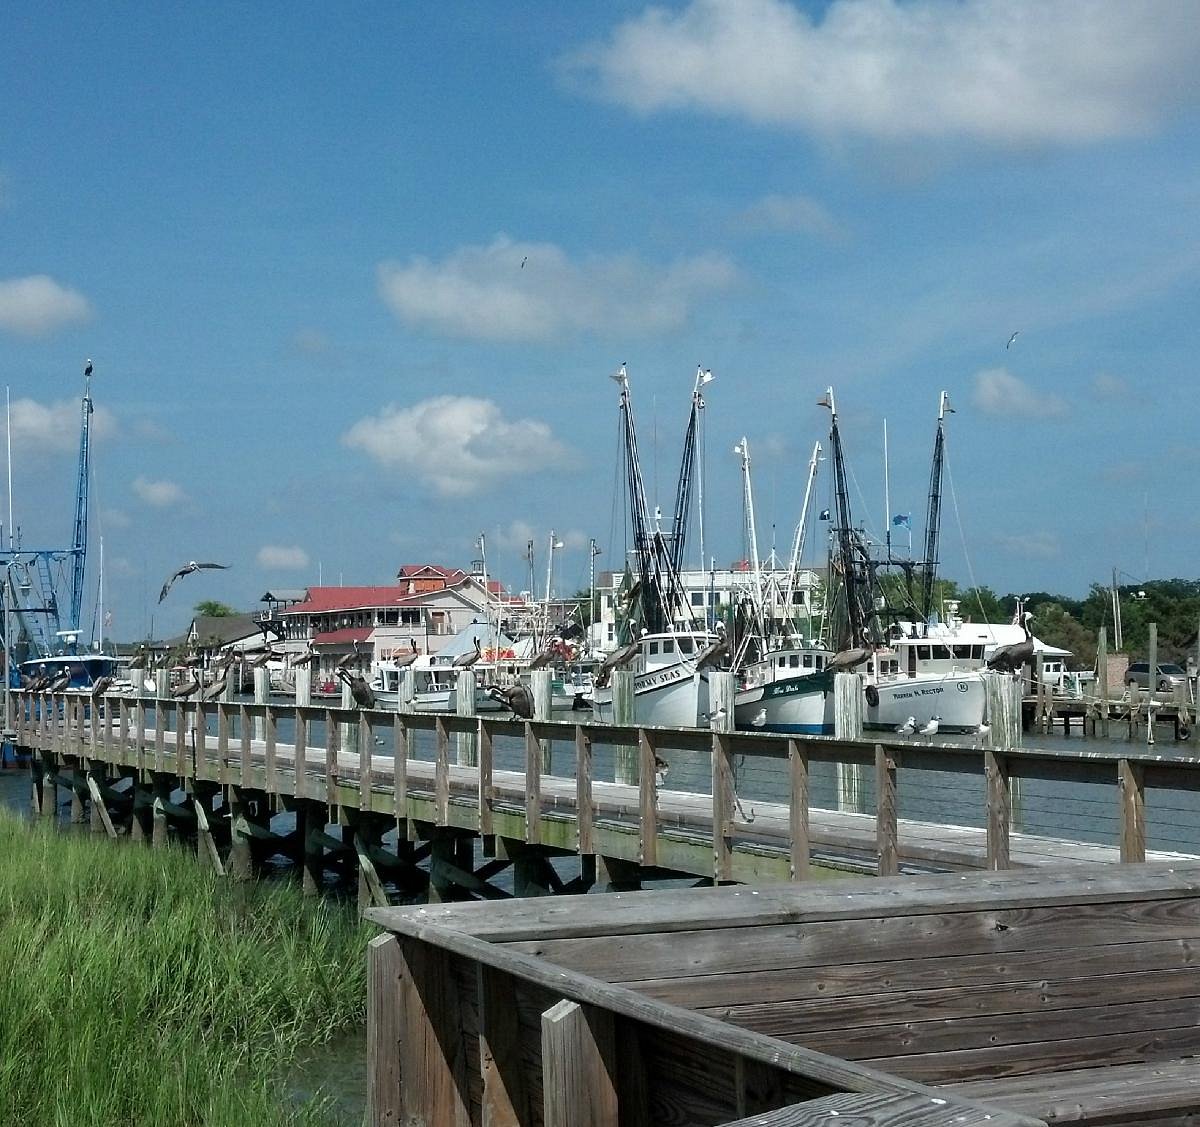 Shem Creek History Tour with Shrimp Boil (Charleston) All You Need to